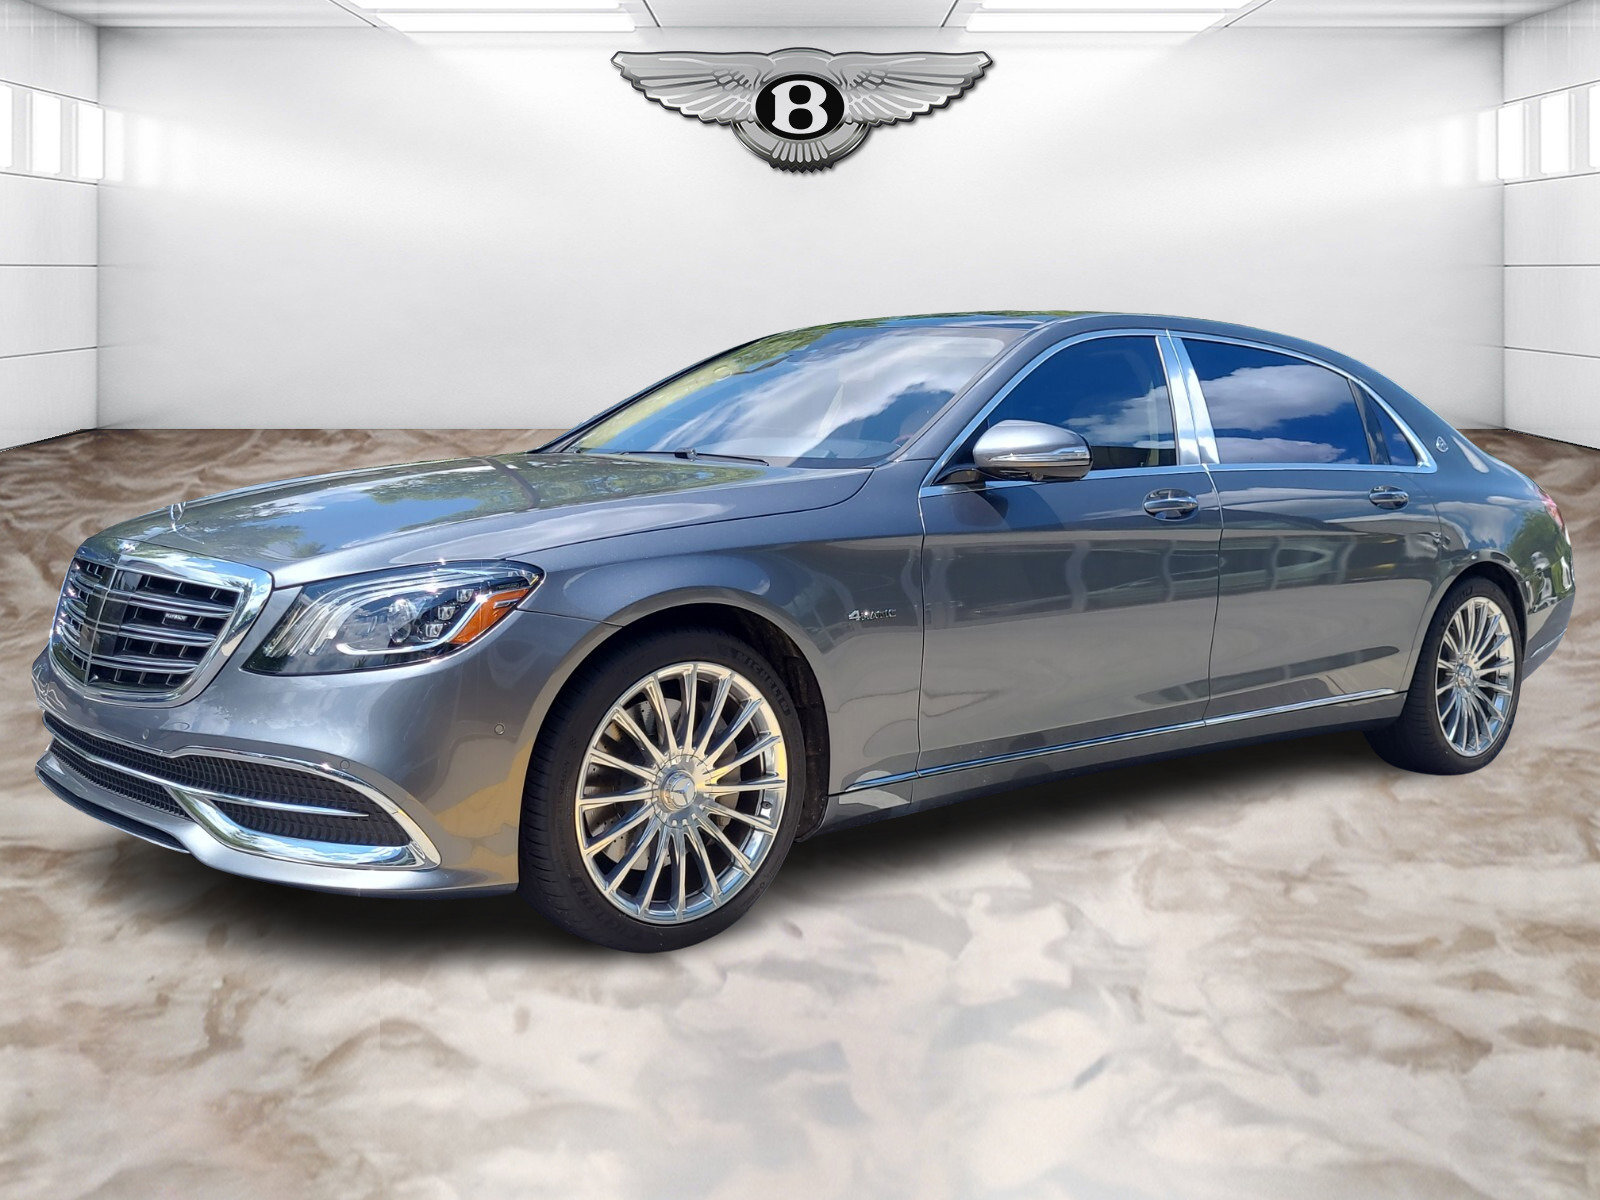 Used Mercedes-Benz Maybach S 560 for Sale - Autotrader